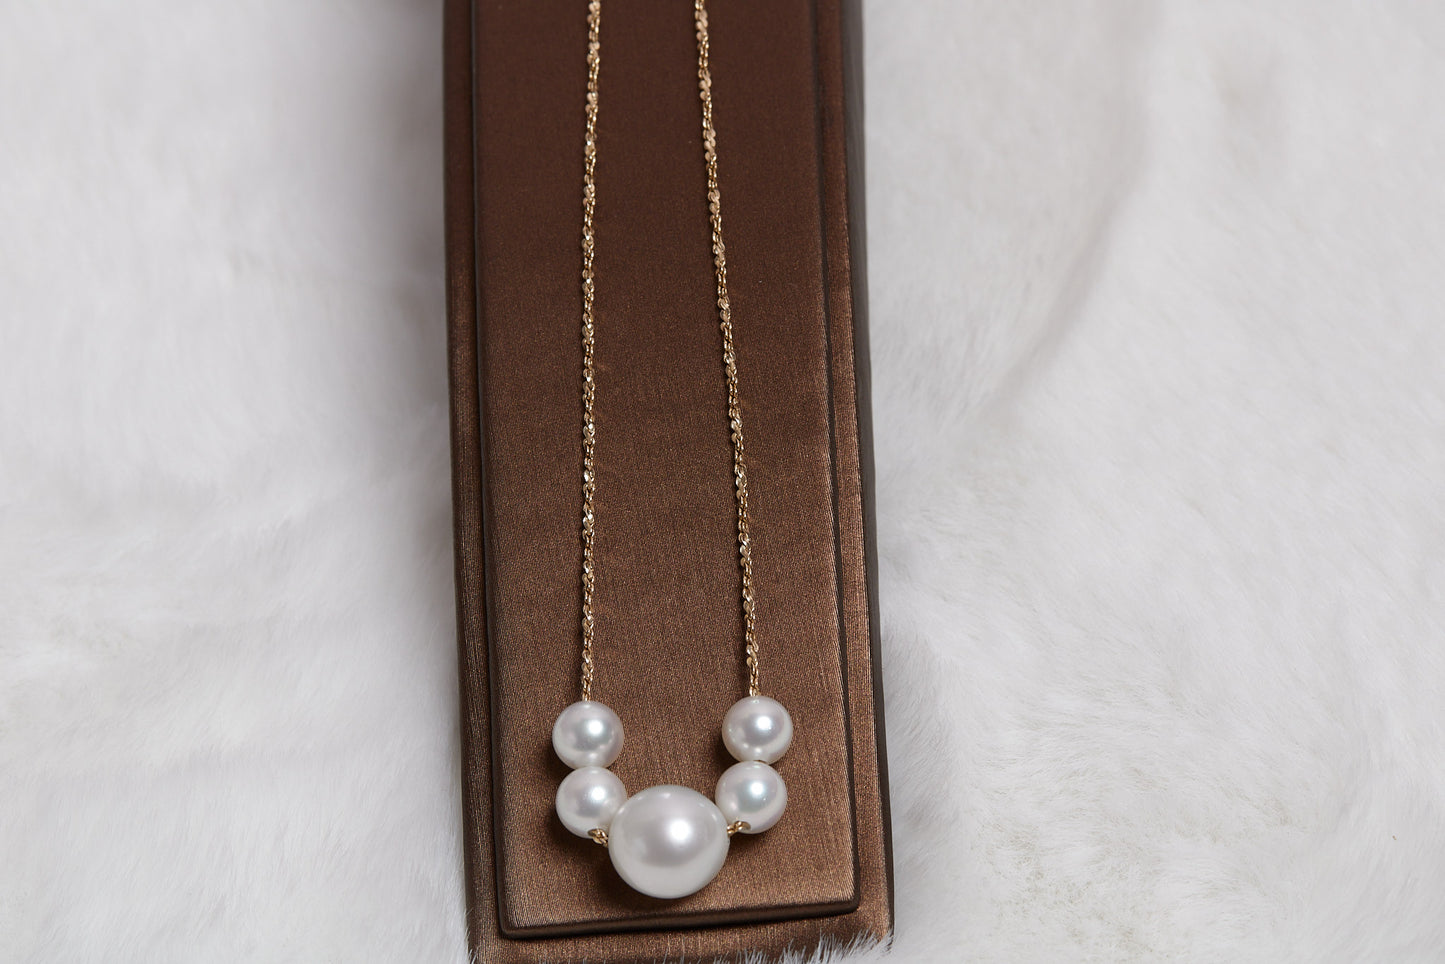 Japanese Akoya and white South Sea Pearl with 18K Gold Necklace